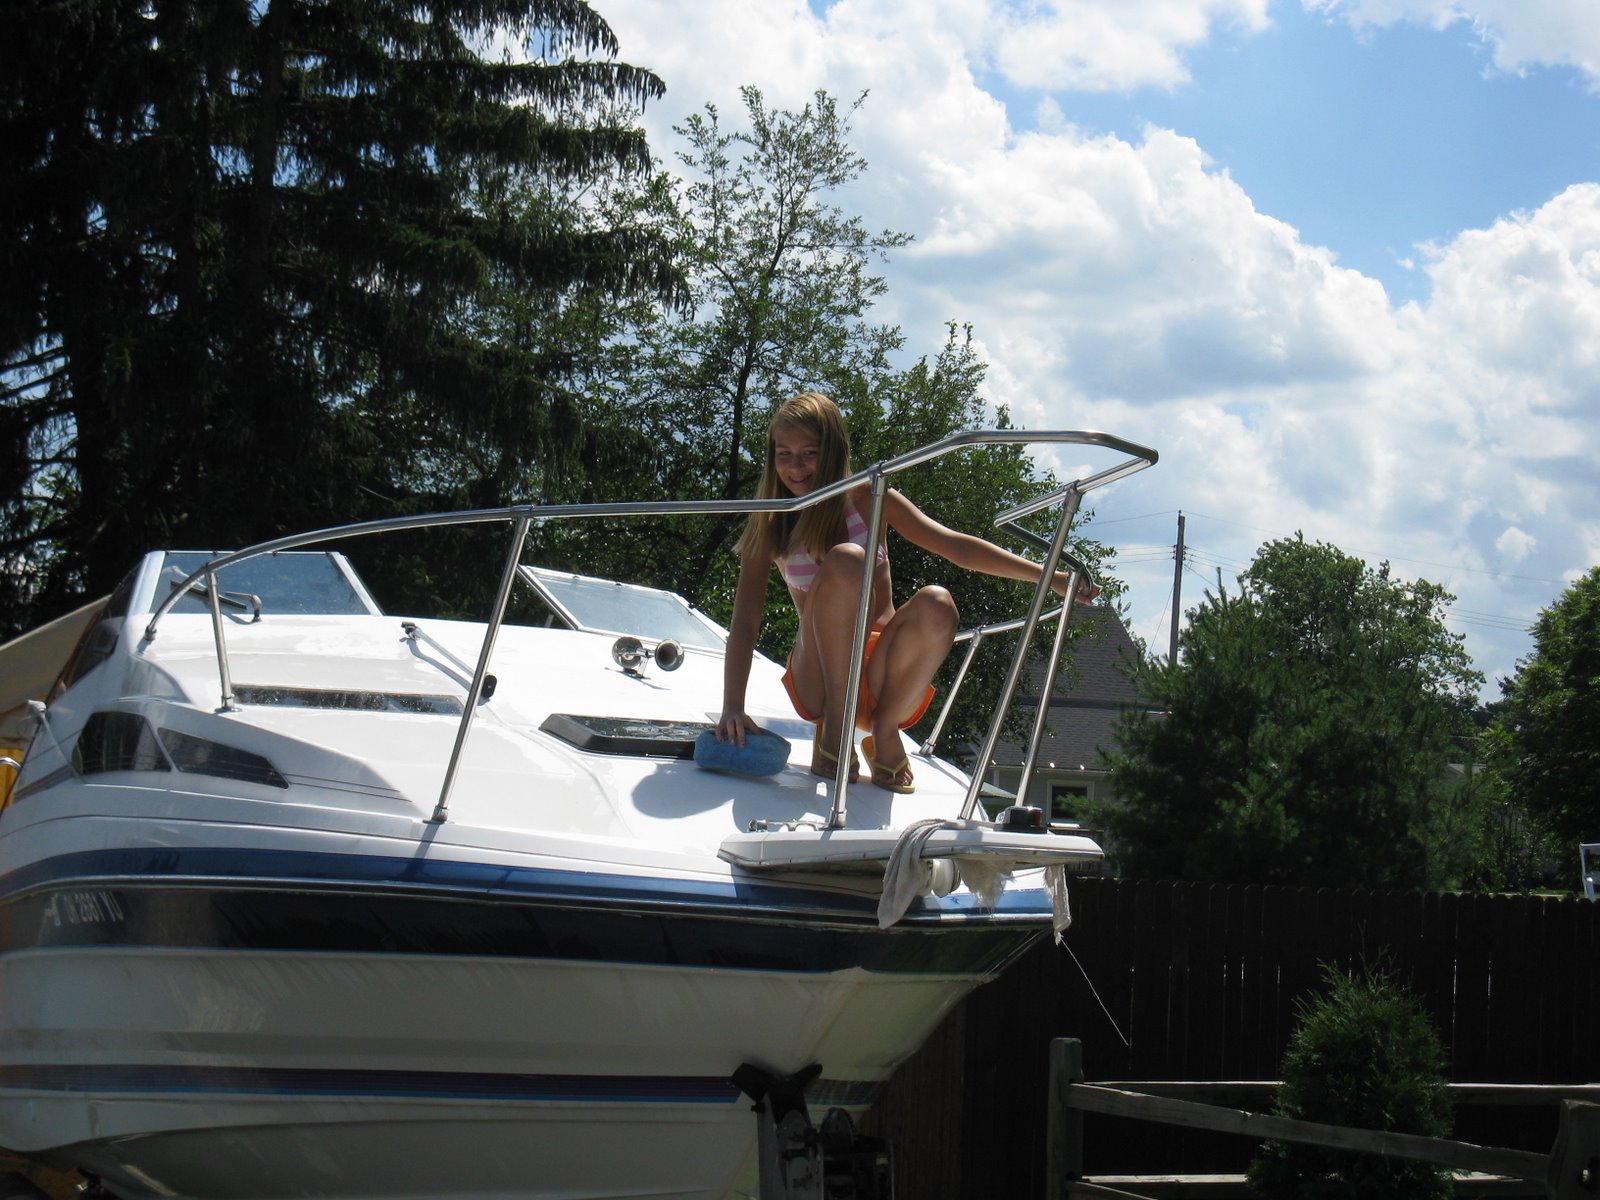 [aubs+cleaning+boat+001.JPG]